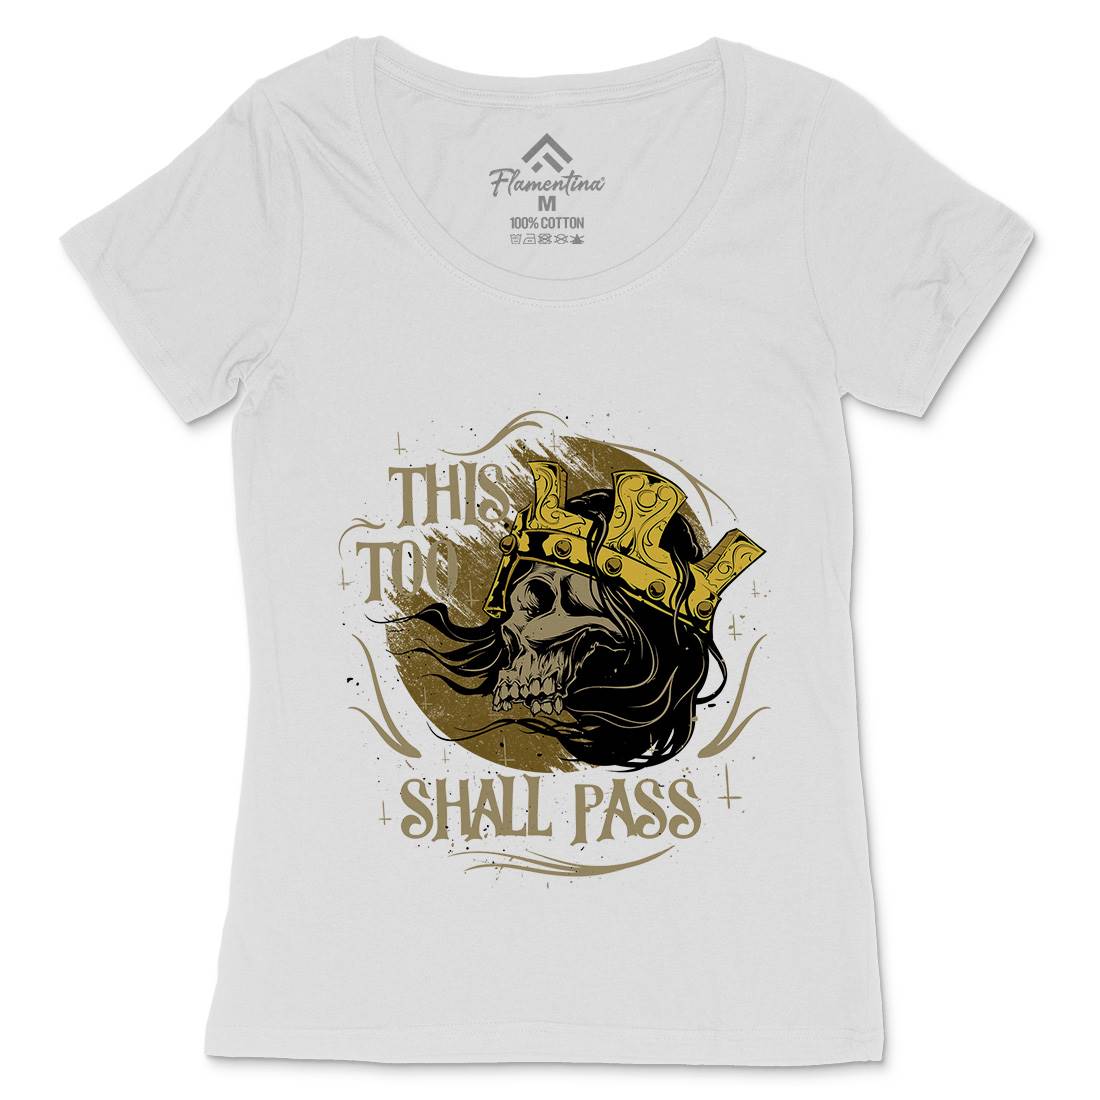 This Too Shall Pass Womens Scoop Neck T-Shirt Horror D492